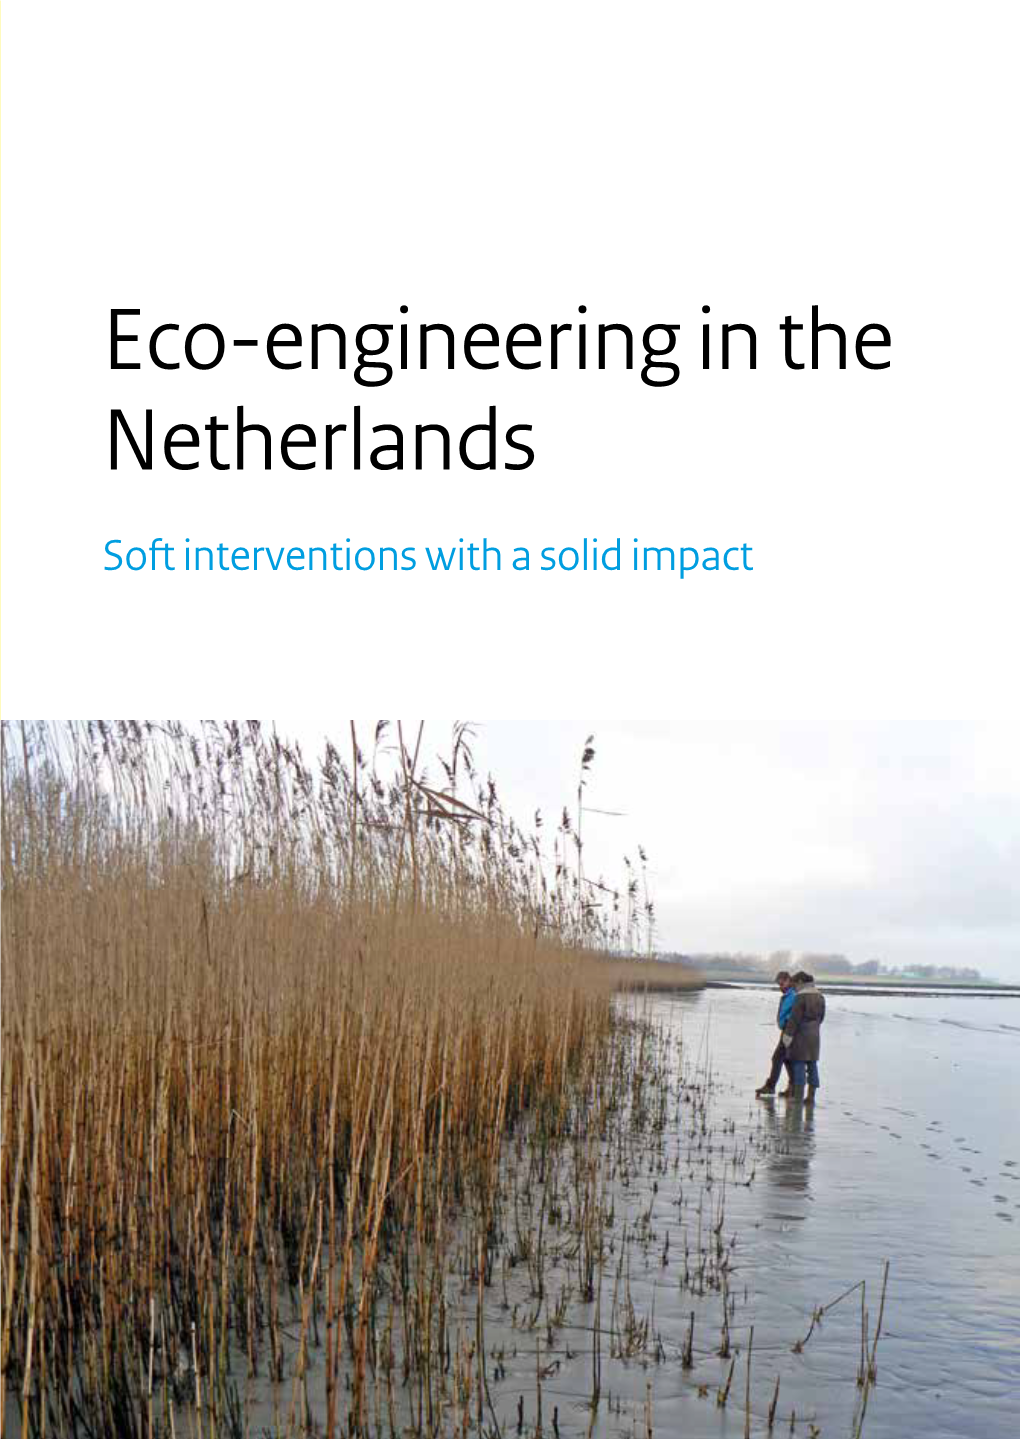 Eco-Engineering in the Netherlands Soft Interventions with a Solid Impact 2 | Rijkswaterstaat and Deltares Contents